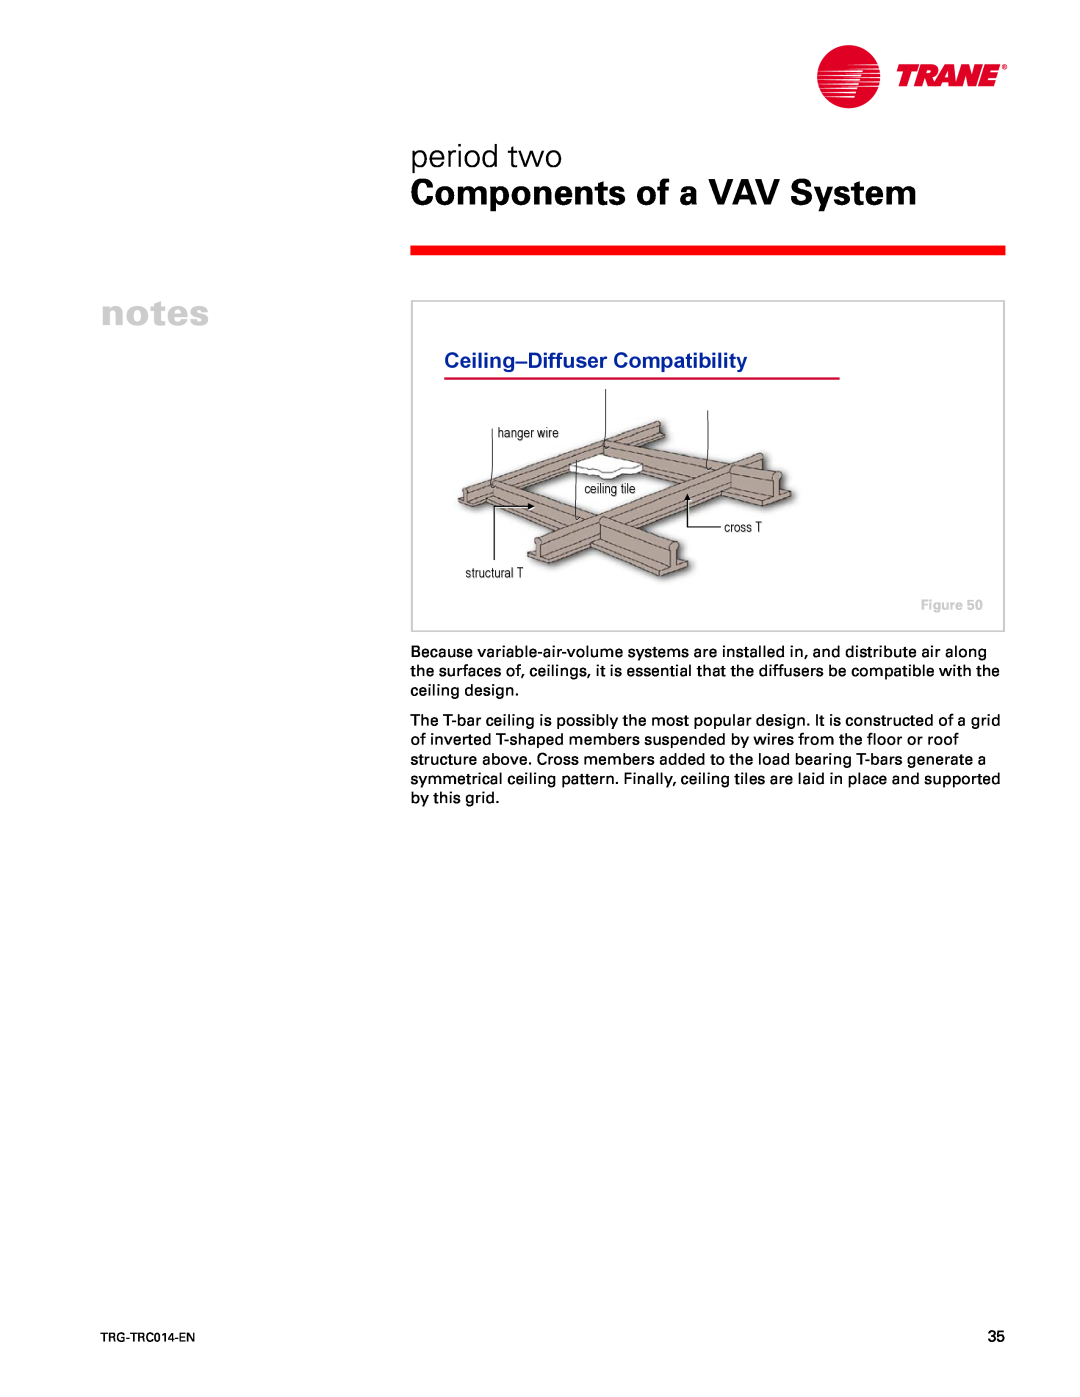 Trane TRG-TRC014-EN manual Ceiling-DiffuserCompatibility, Components of a VAV System, period two 